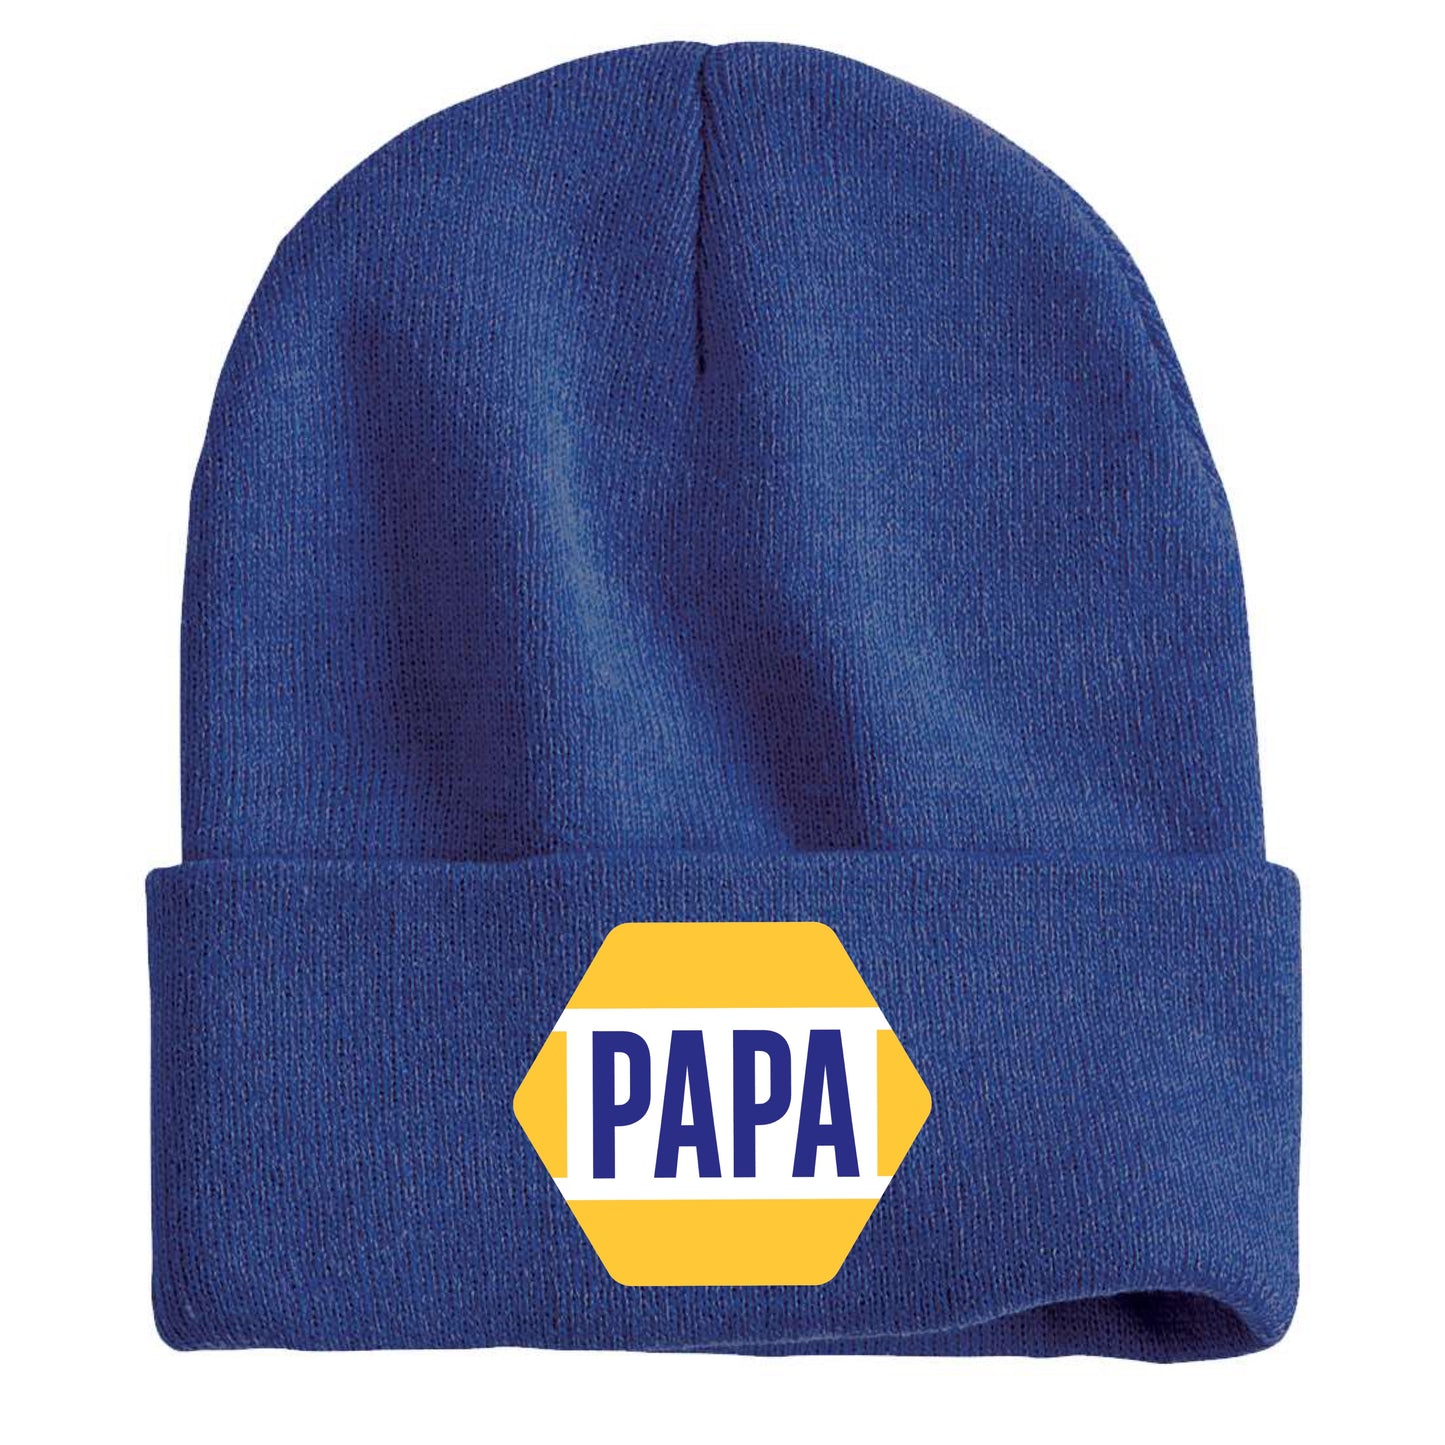 PAPA Know How 3D 12 in Knit Beanie- Heather Dark Royal - Ten Gallon Hat Co.